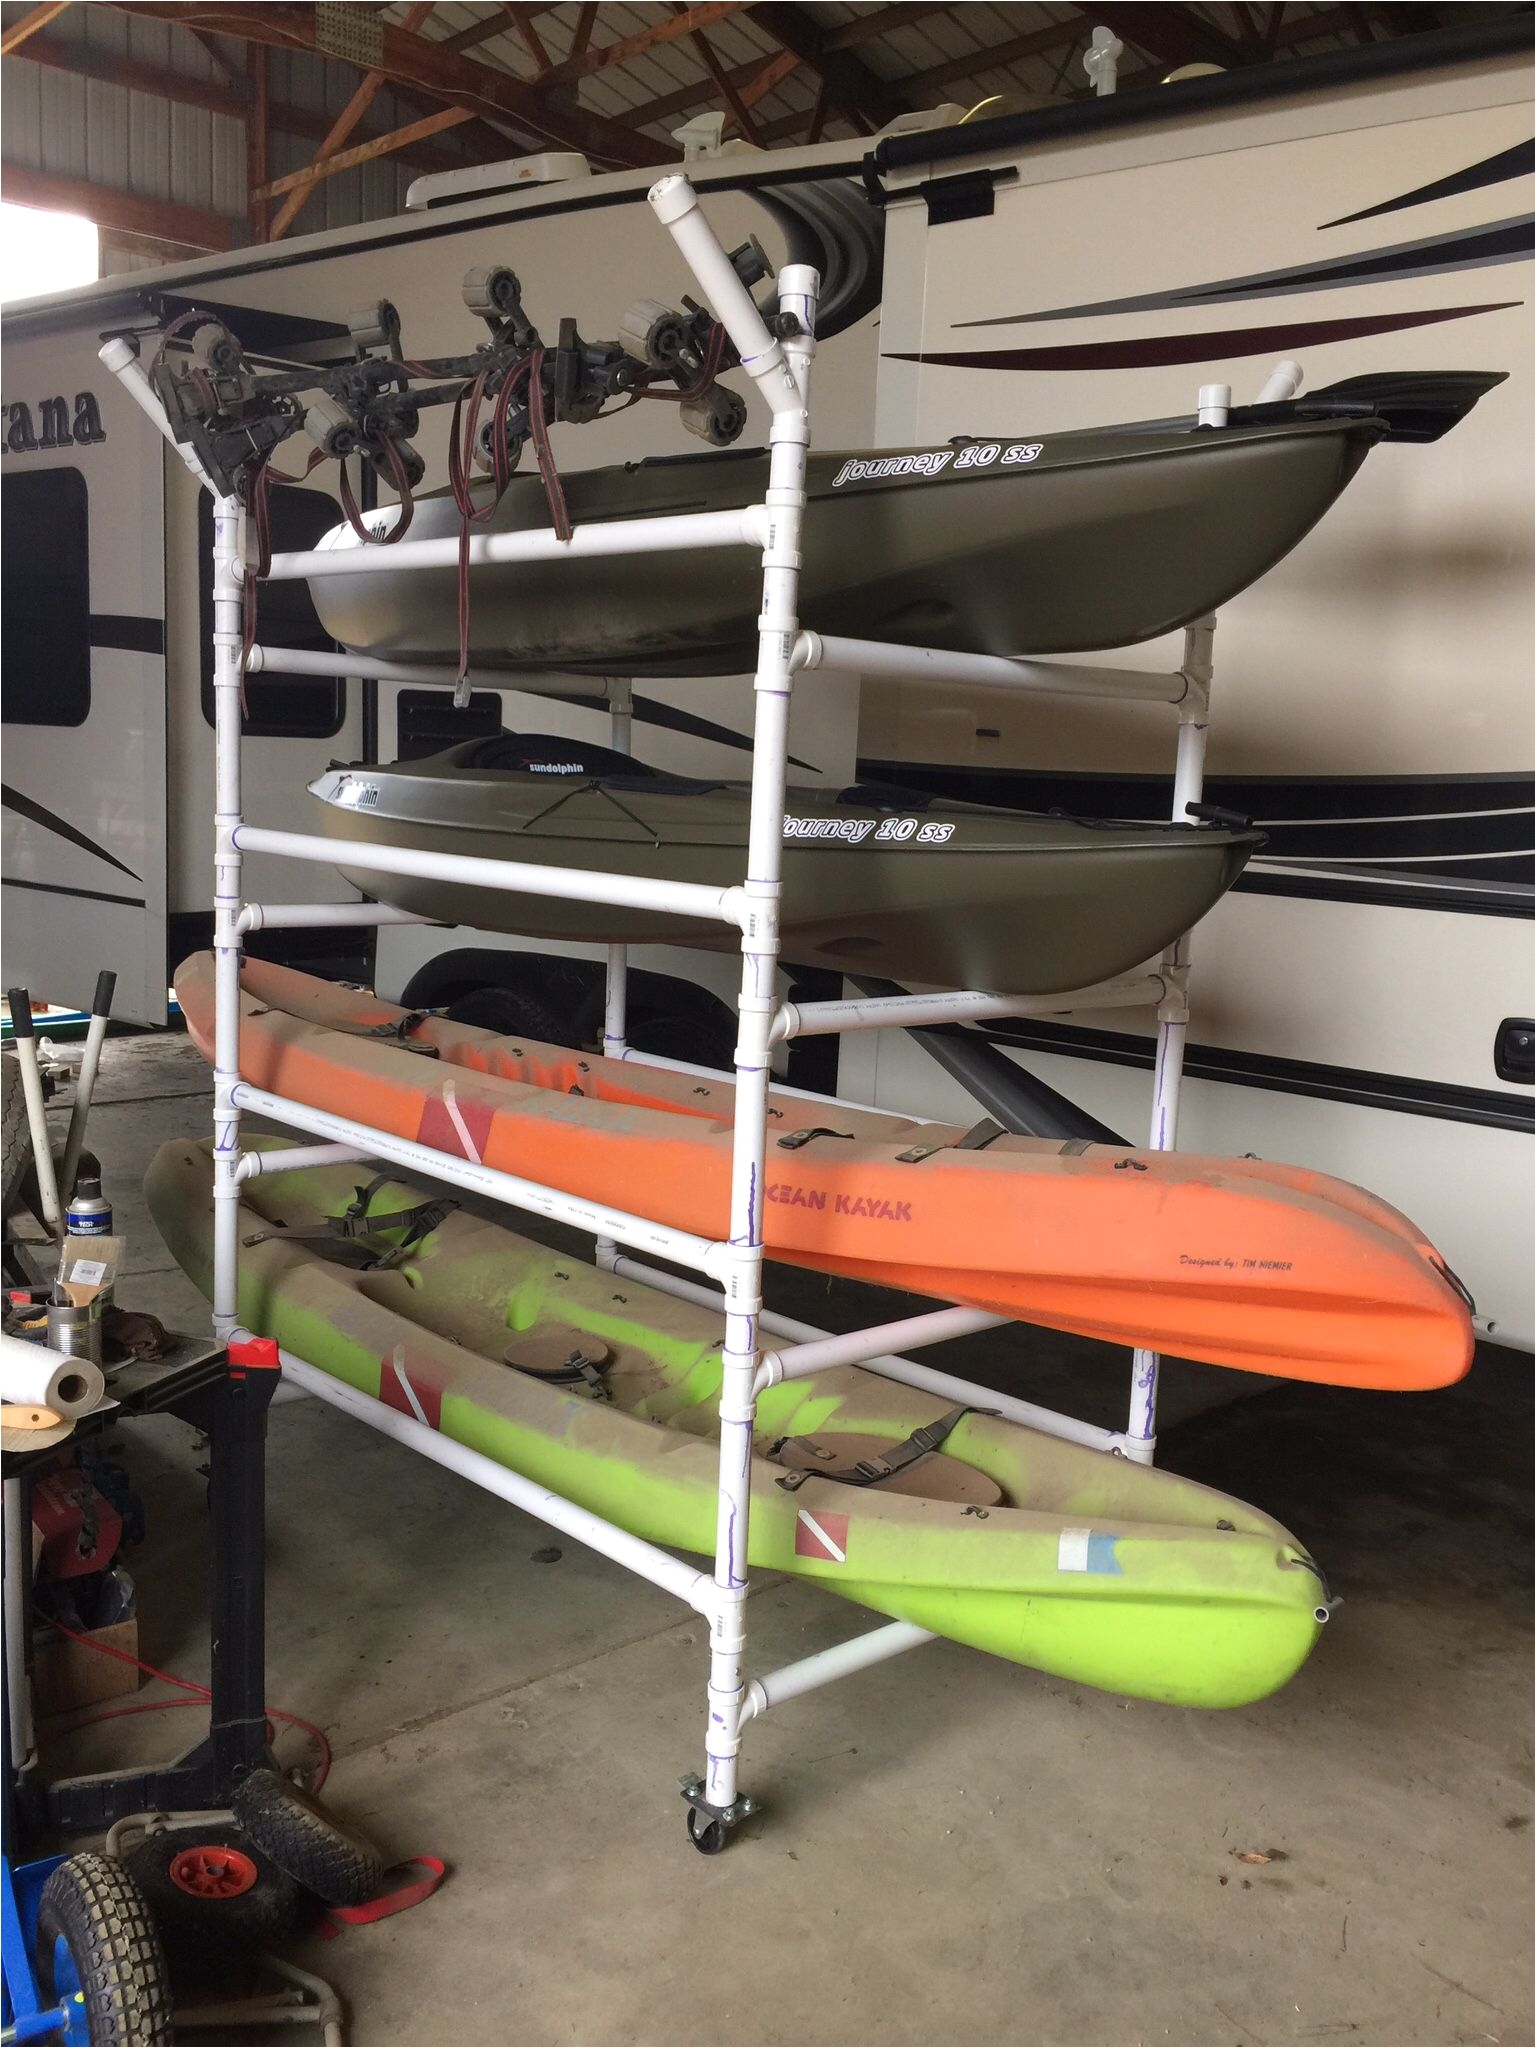 homemade pvc kayak rack can store 4 kayaks paddles kayak car rack made from 1 5 schedule 40 pvc 40 wide x 5 long cost around 250 in 2015 prices has